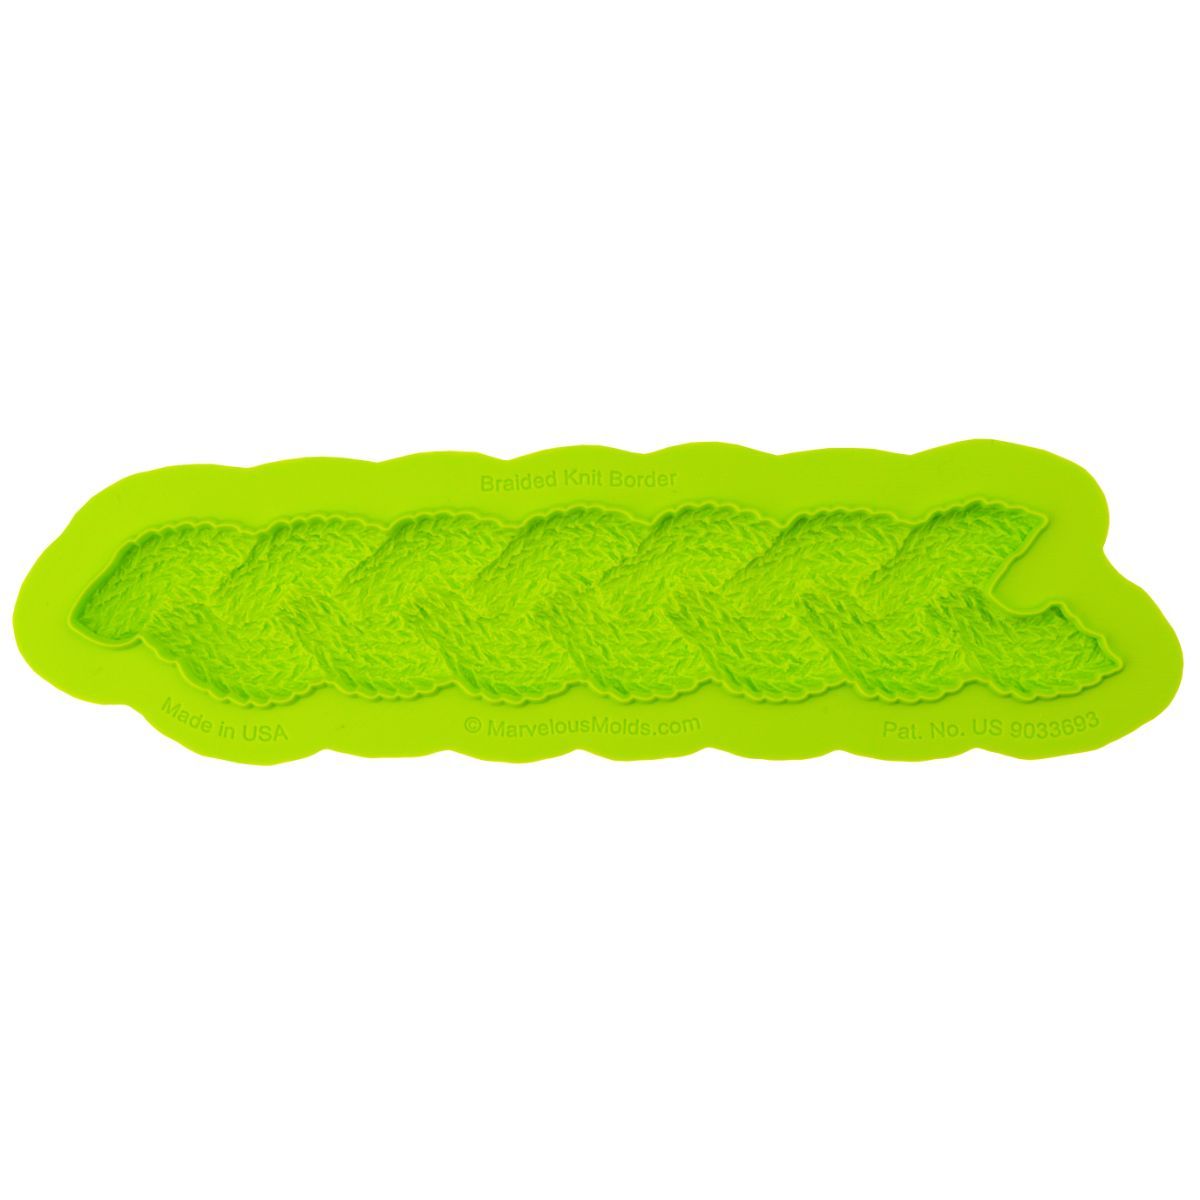 Braided Knit Border Mold Marvelous Molds Silicone Mold - Bake Supply Plus